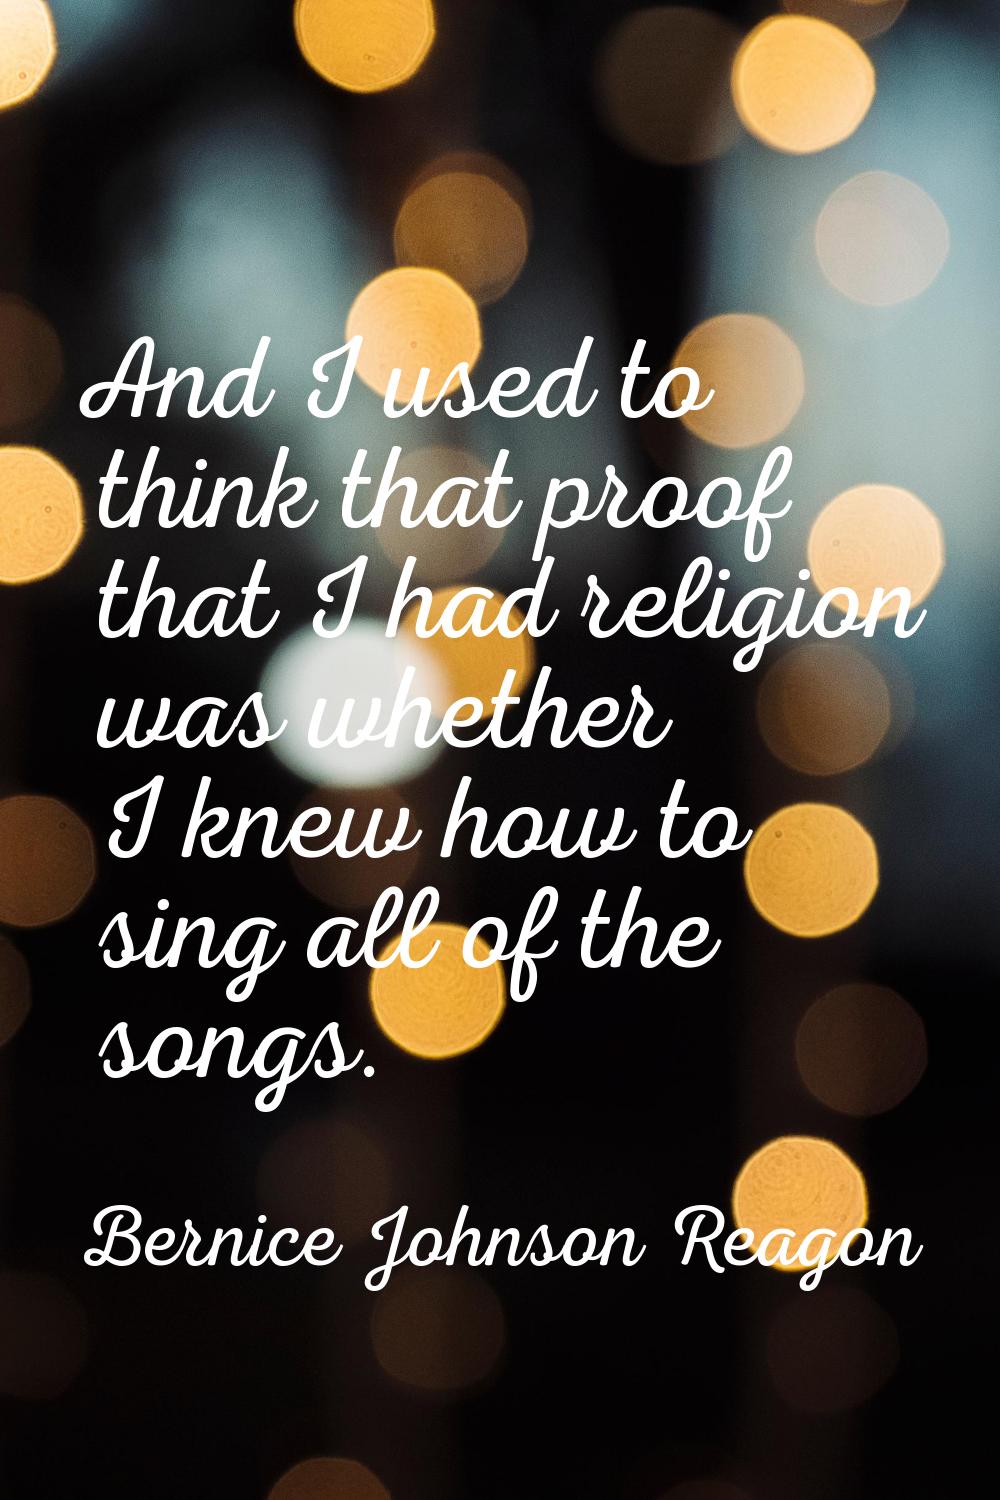 And I used to think that proof that I had religion was whether I knew how to sing all of the songs.